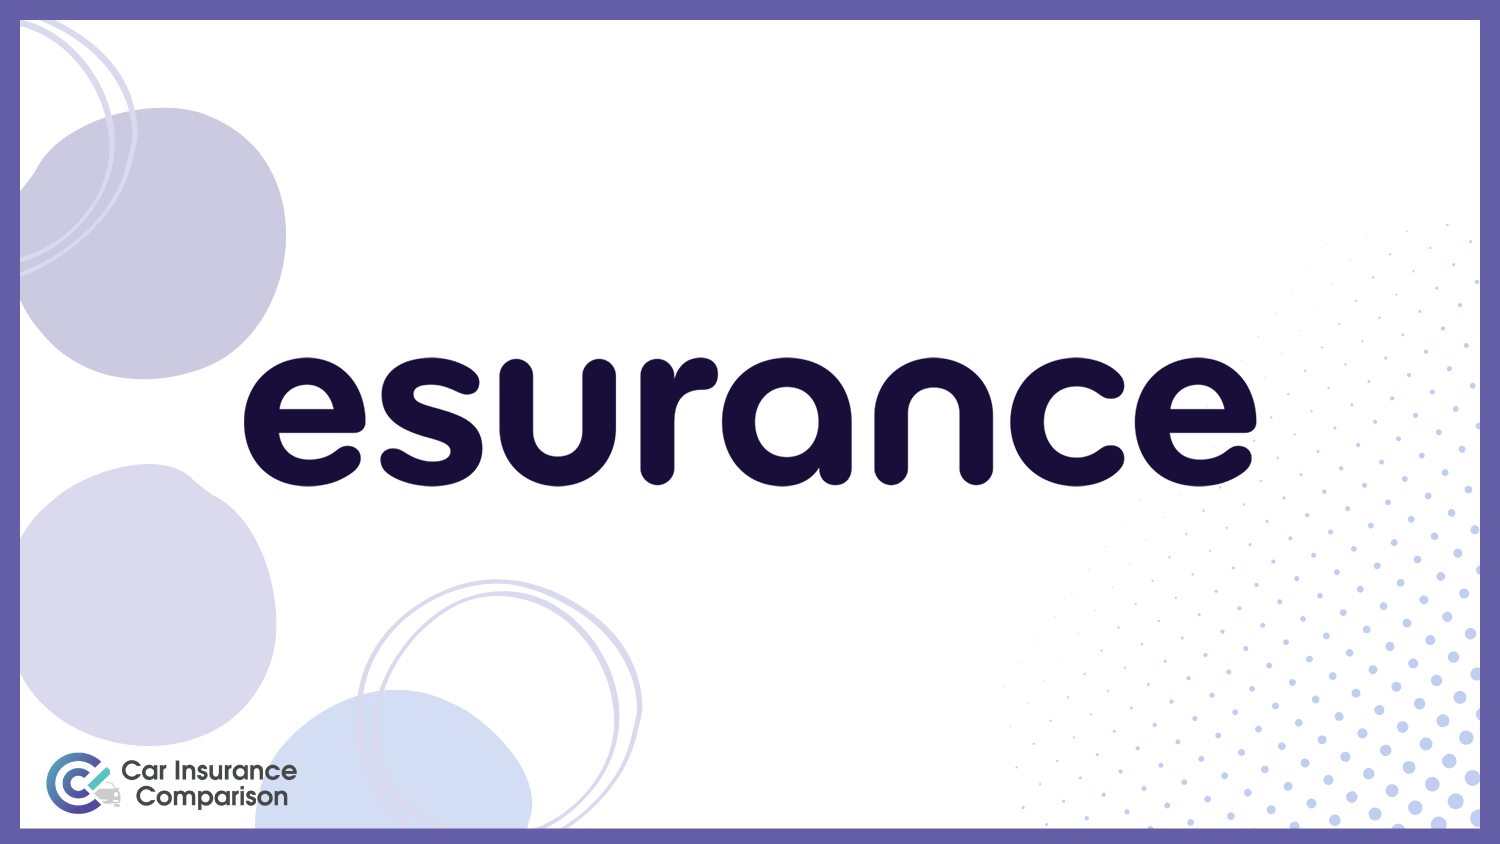 Esurance: Compare Car Insurance Rates for First-time Drivers